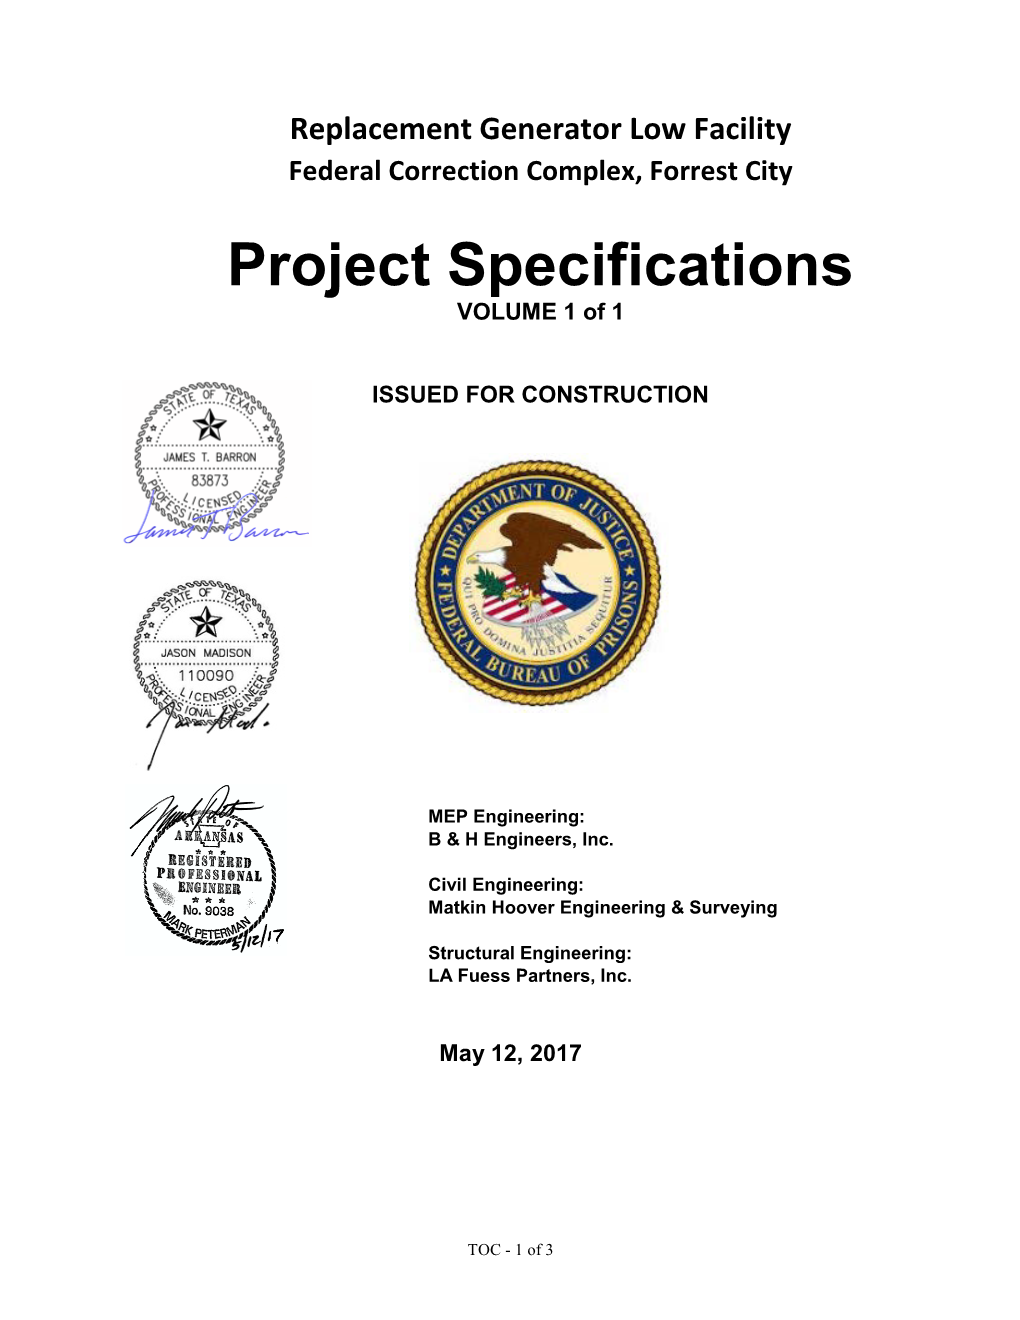 Specifications VOLUME 1 of 1